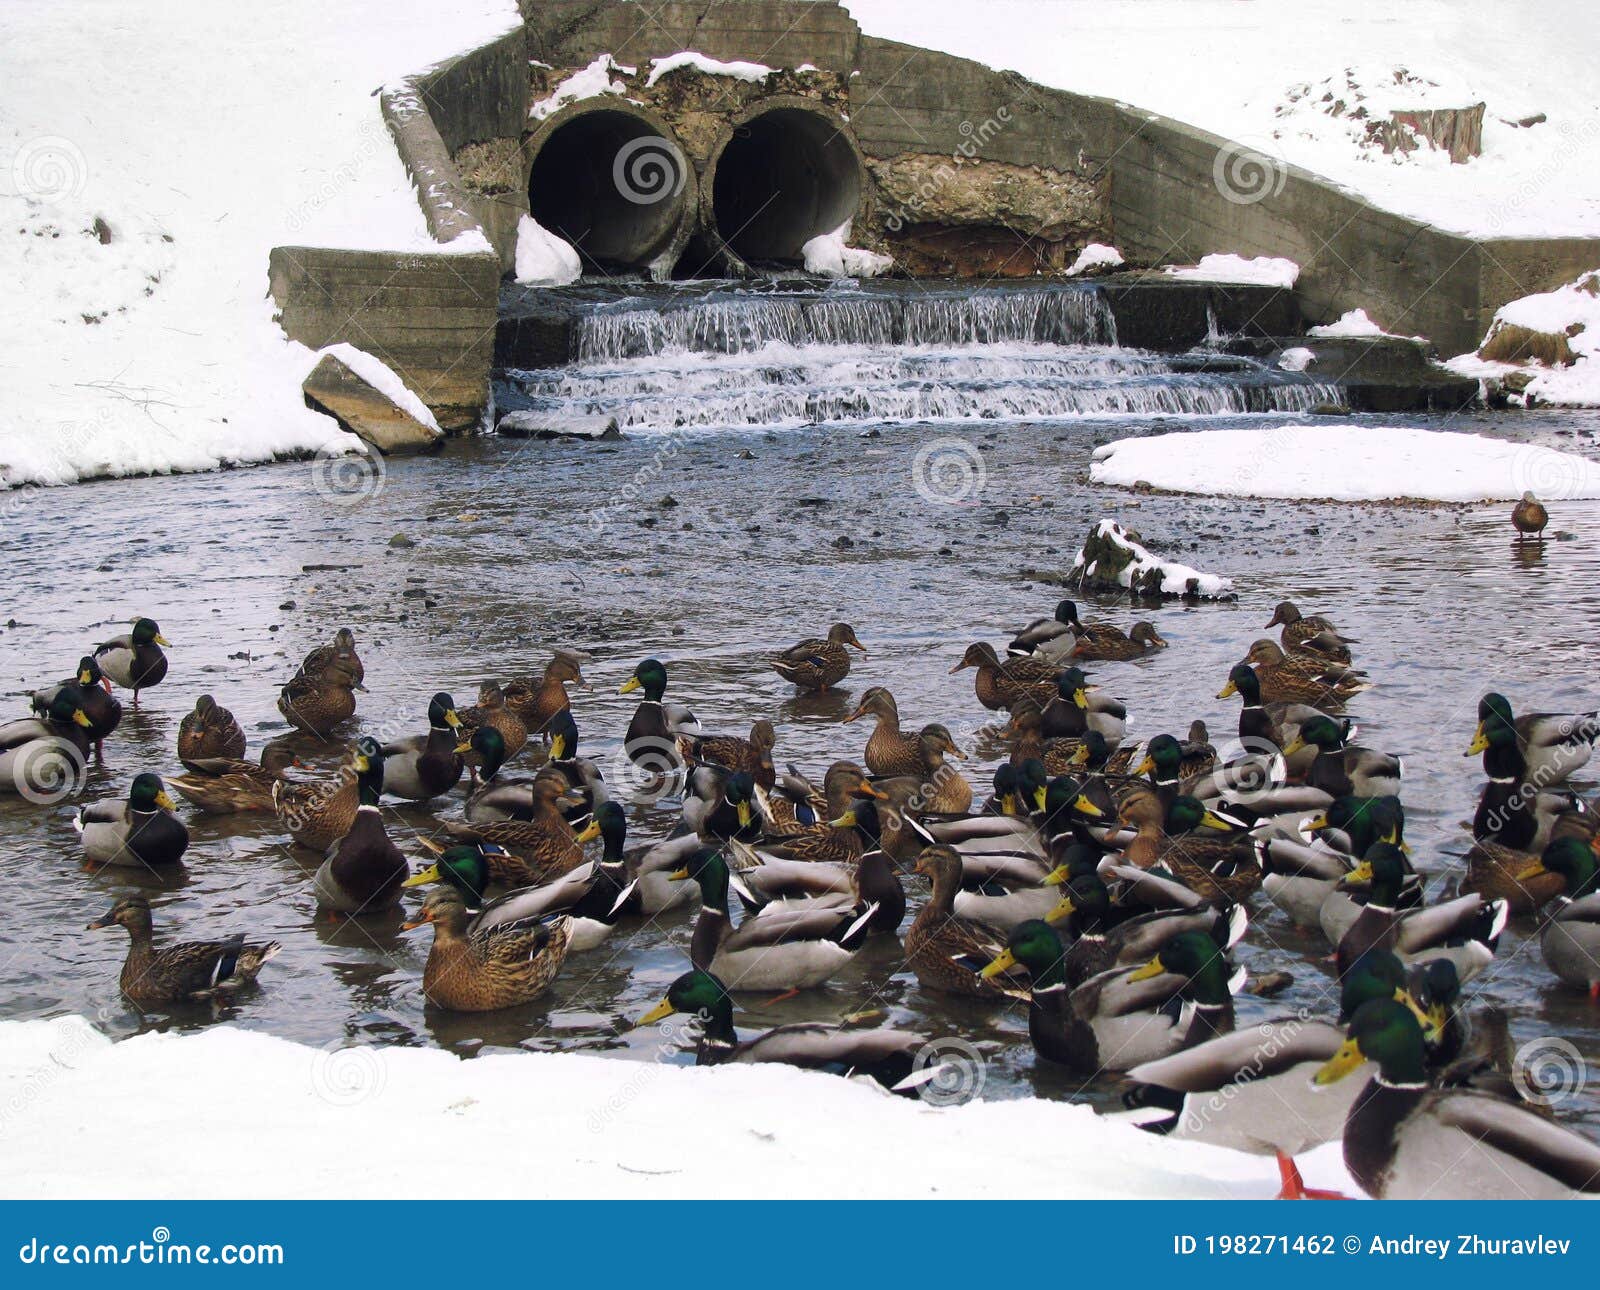 ducks winter in the city pond. ducks overwinter on the freezing river. problems of birds in ice-covered reservoir